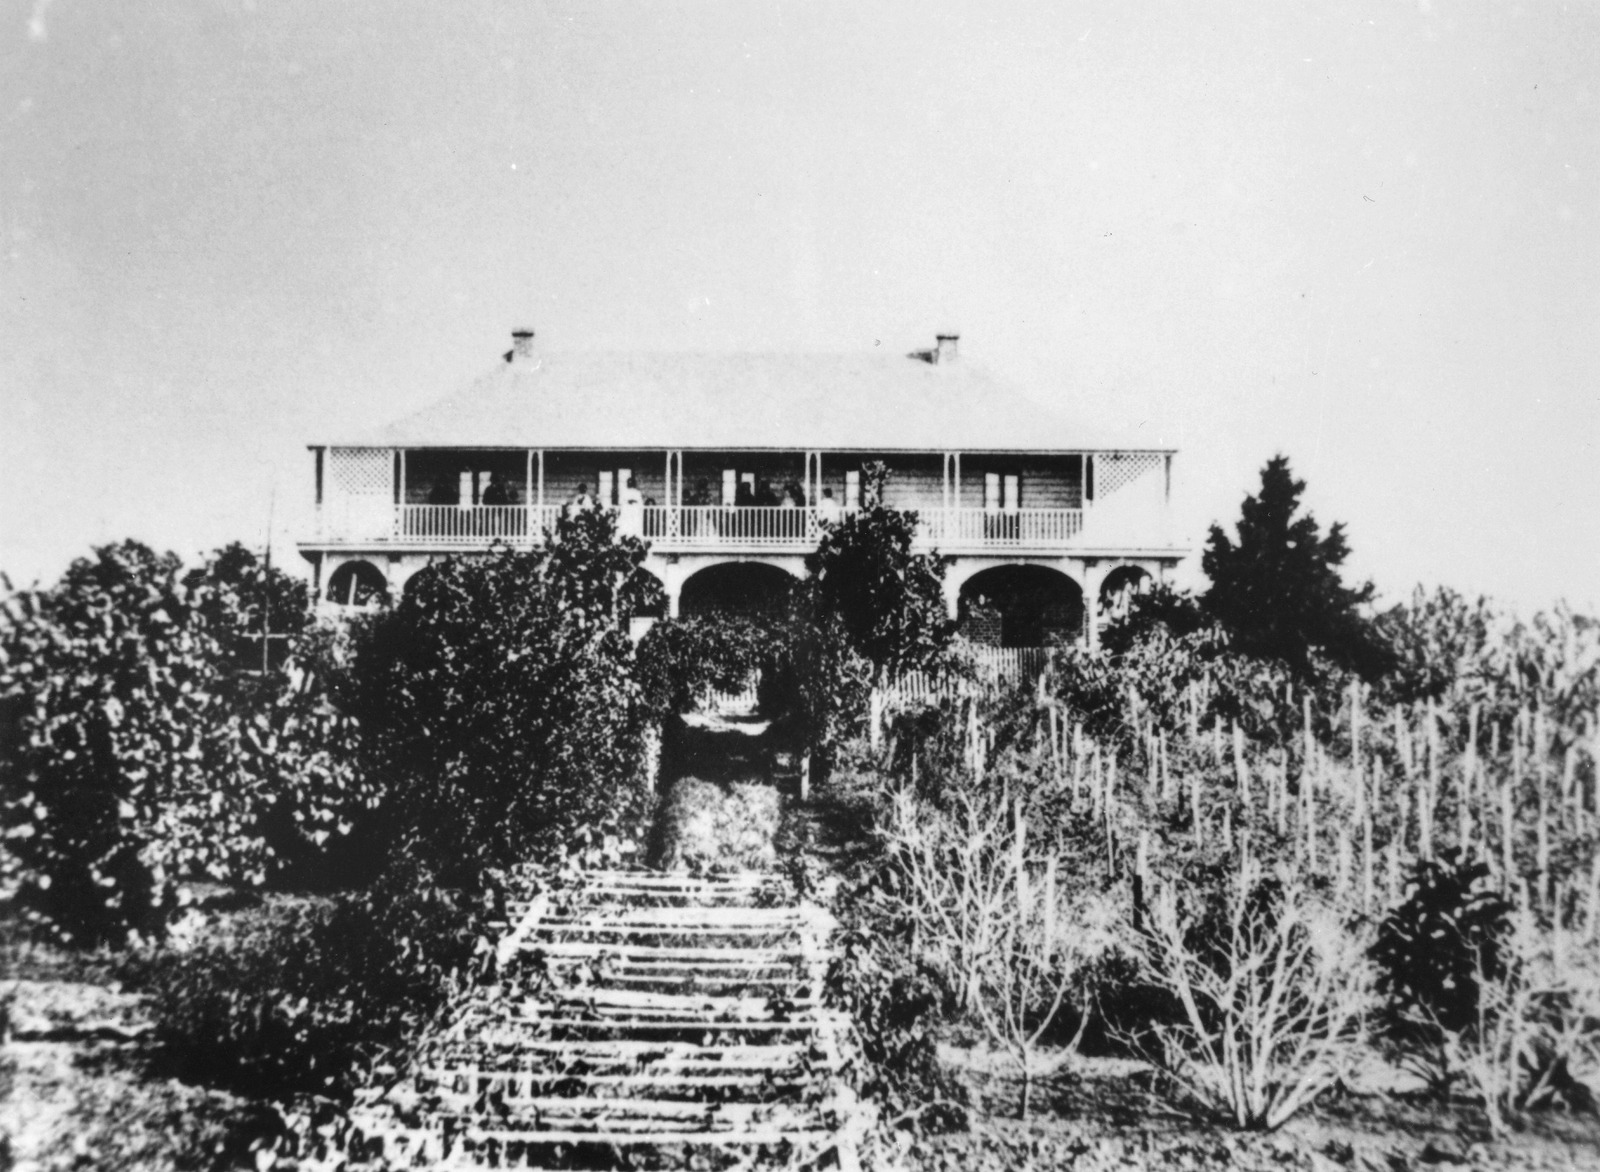 Photograph of Rosehill House, Maryborough, ca. 1860. Source: John Oxley Library, State Library of Queensland, Negative No. 86362.